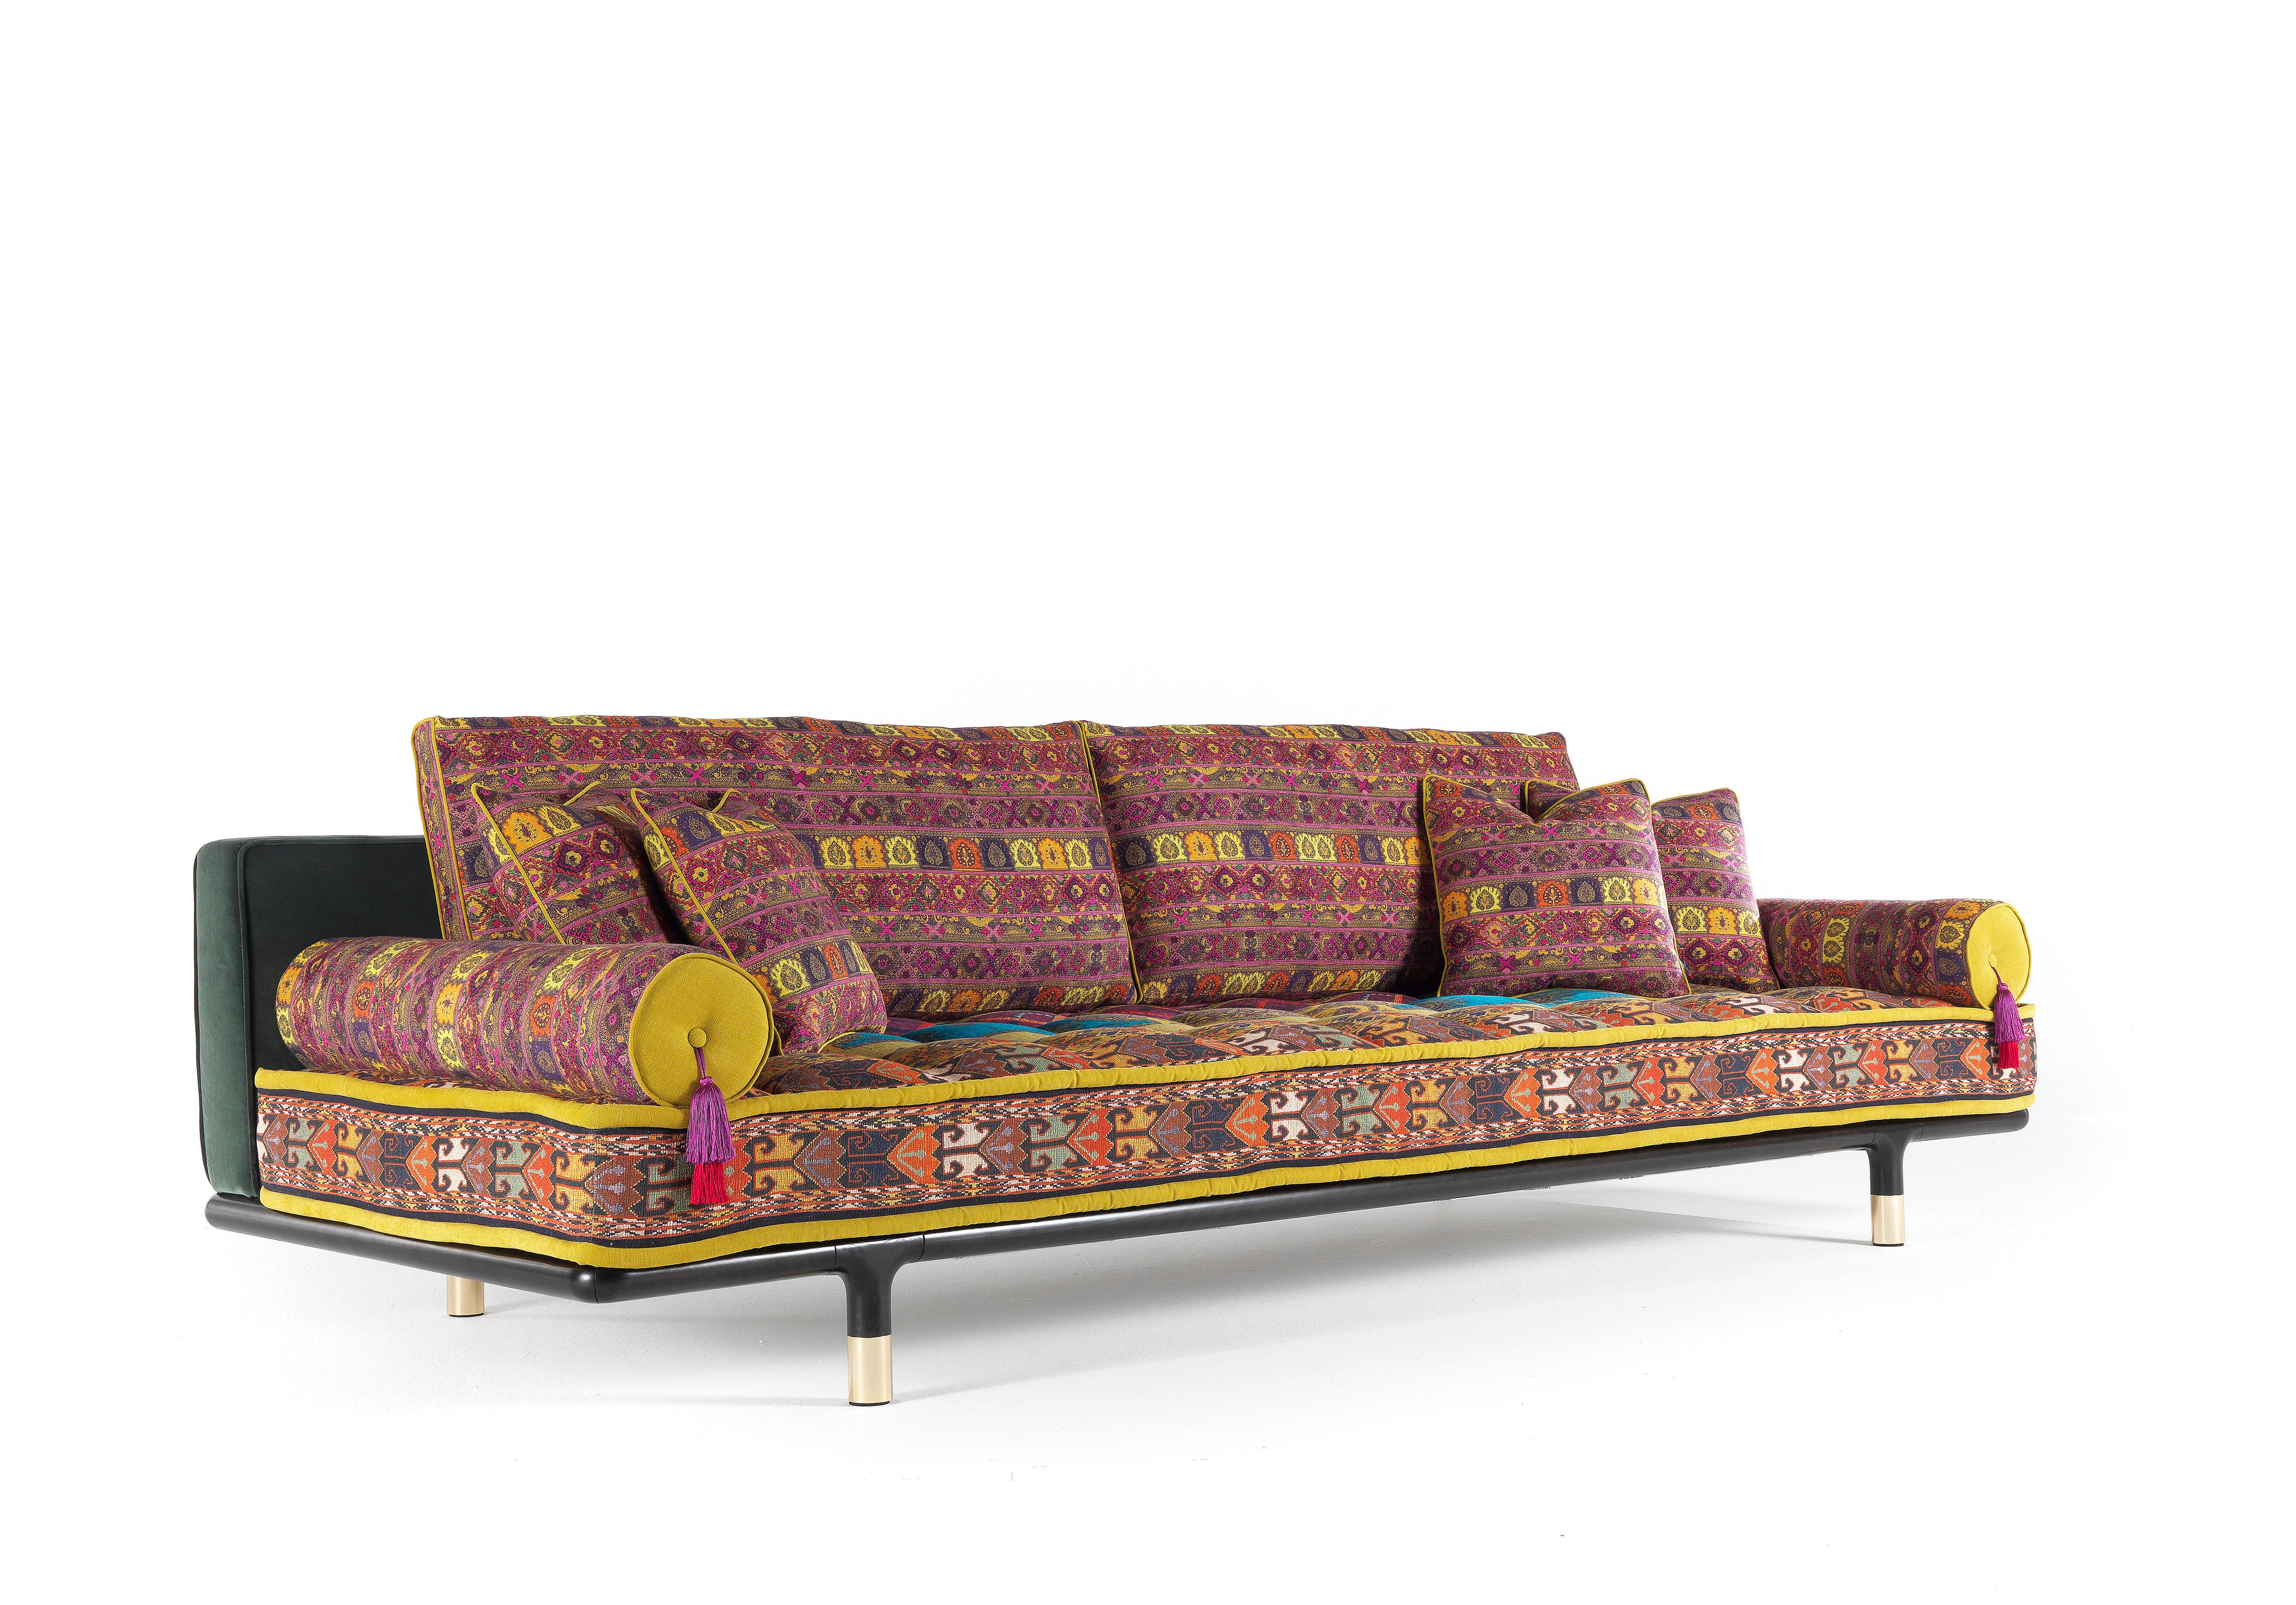 A sofa with a welcoming and comfortable look, emphasized by the mattress conformation of the seat. Refined details such as the polished brass tips of the basement and the roll cushions with decorative tassels enhance the whole effect, showing the